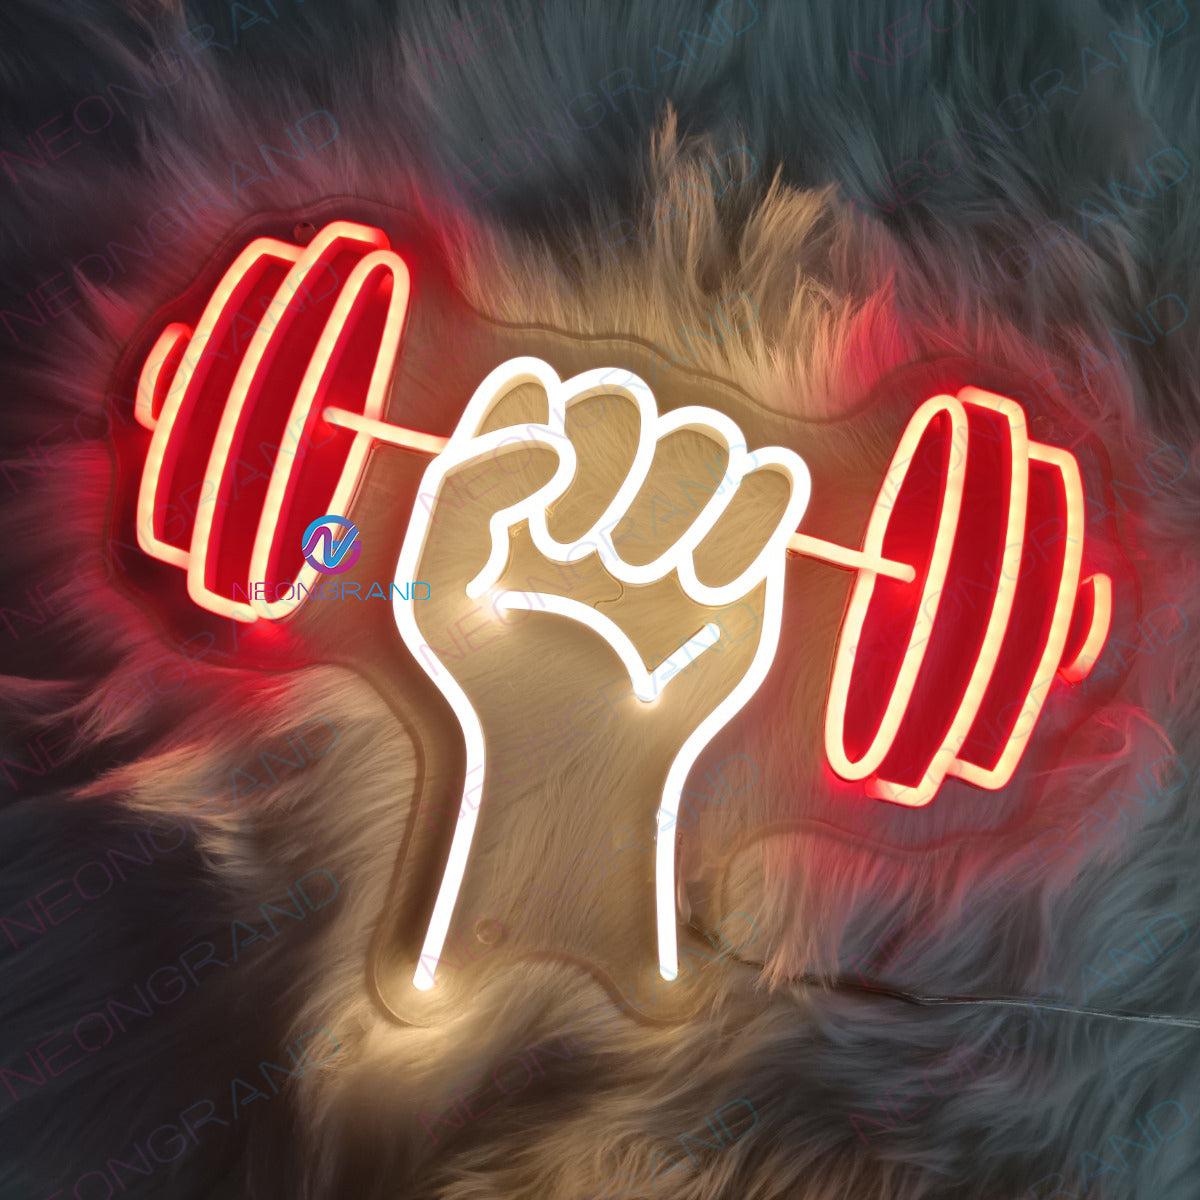 Gym Neon Sign Workout Led Light red